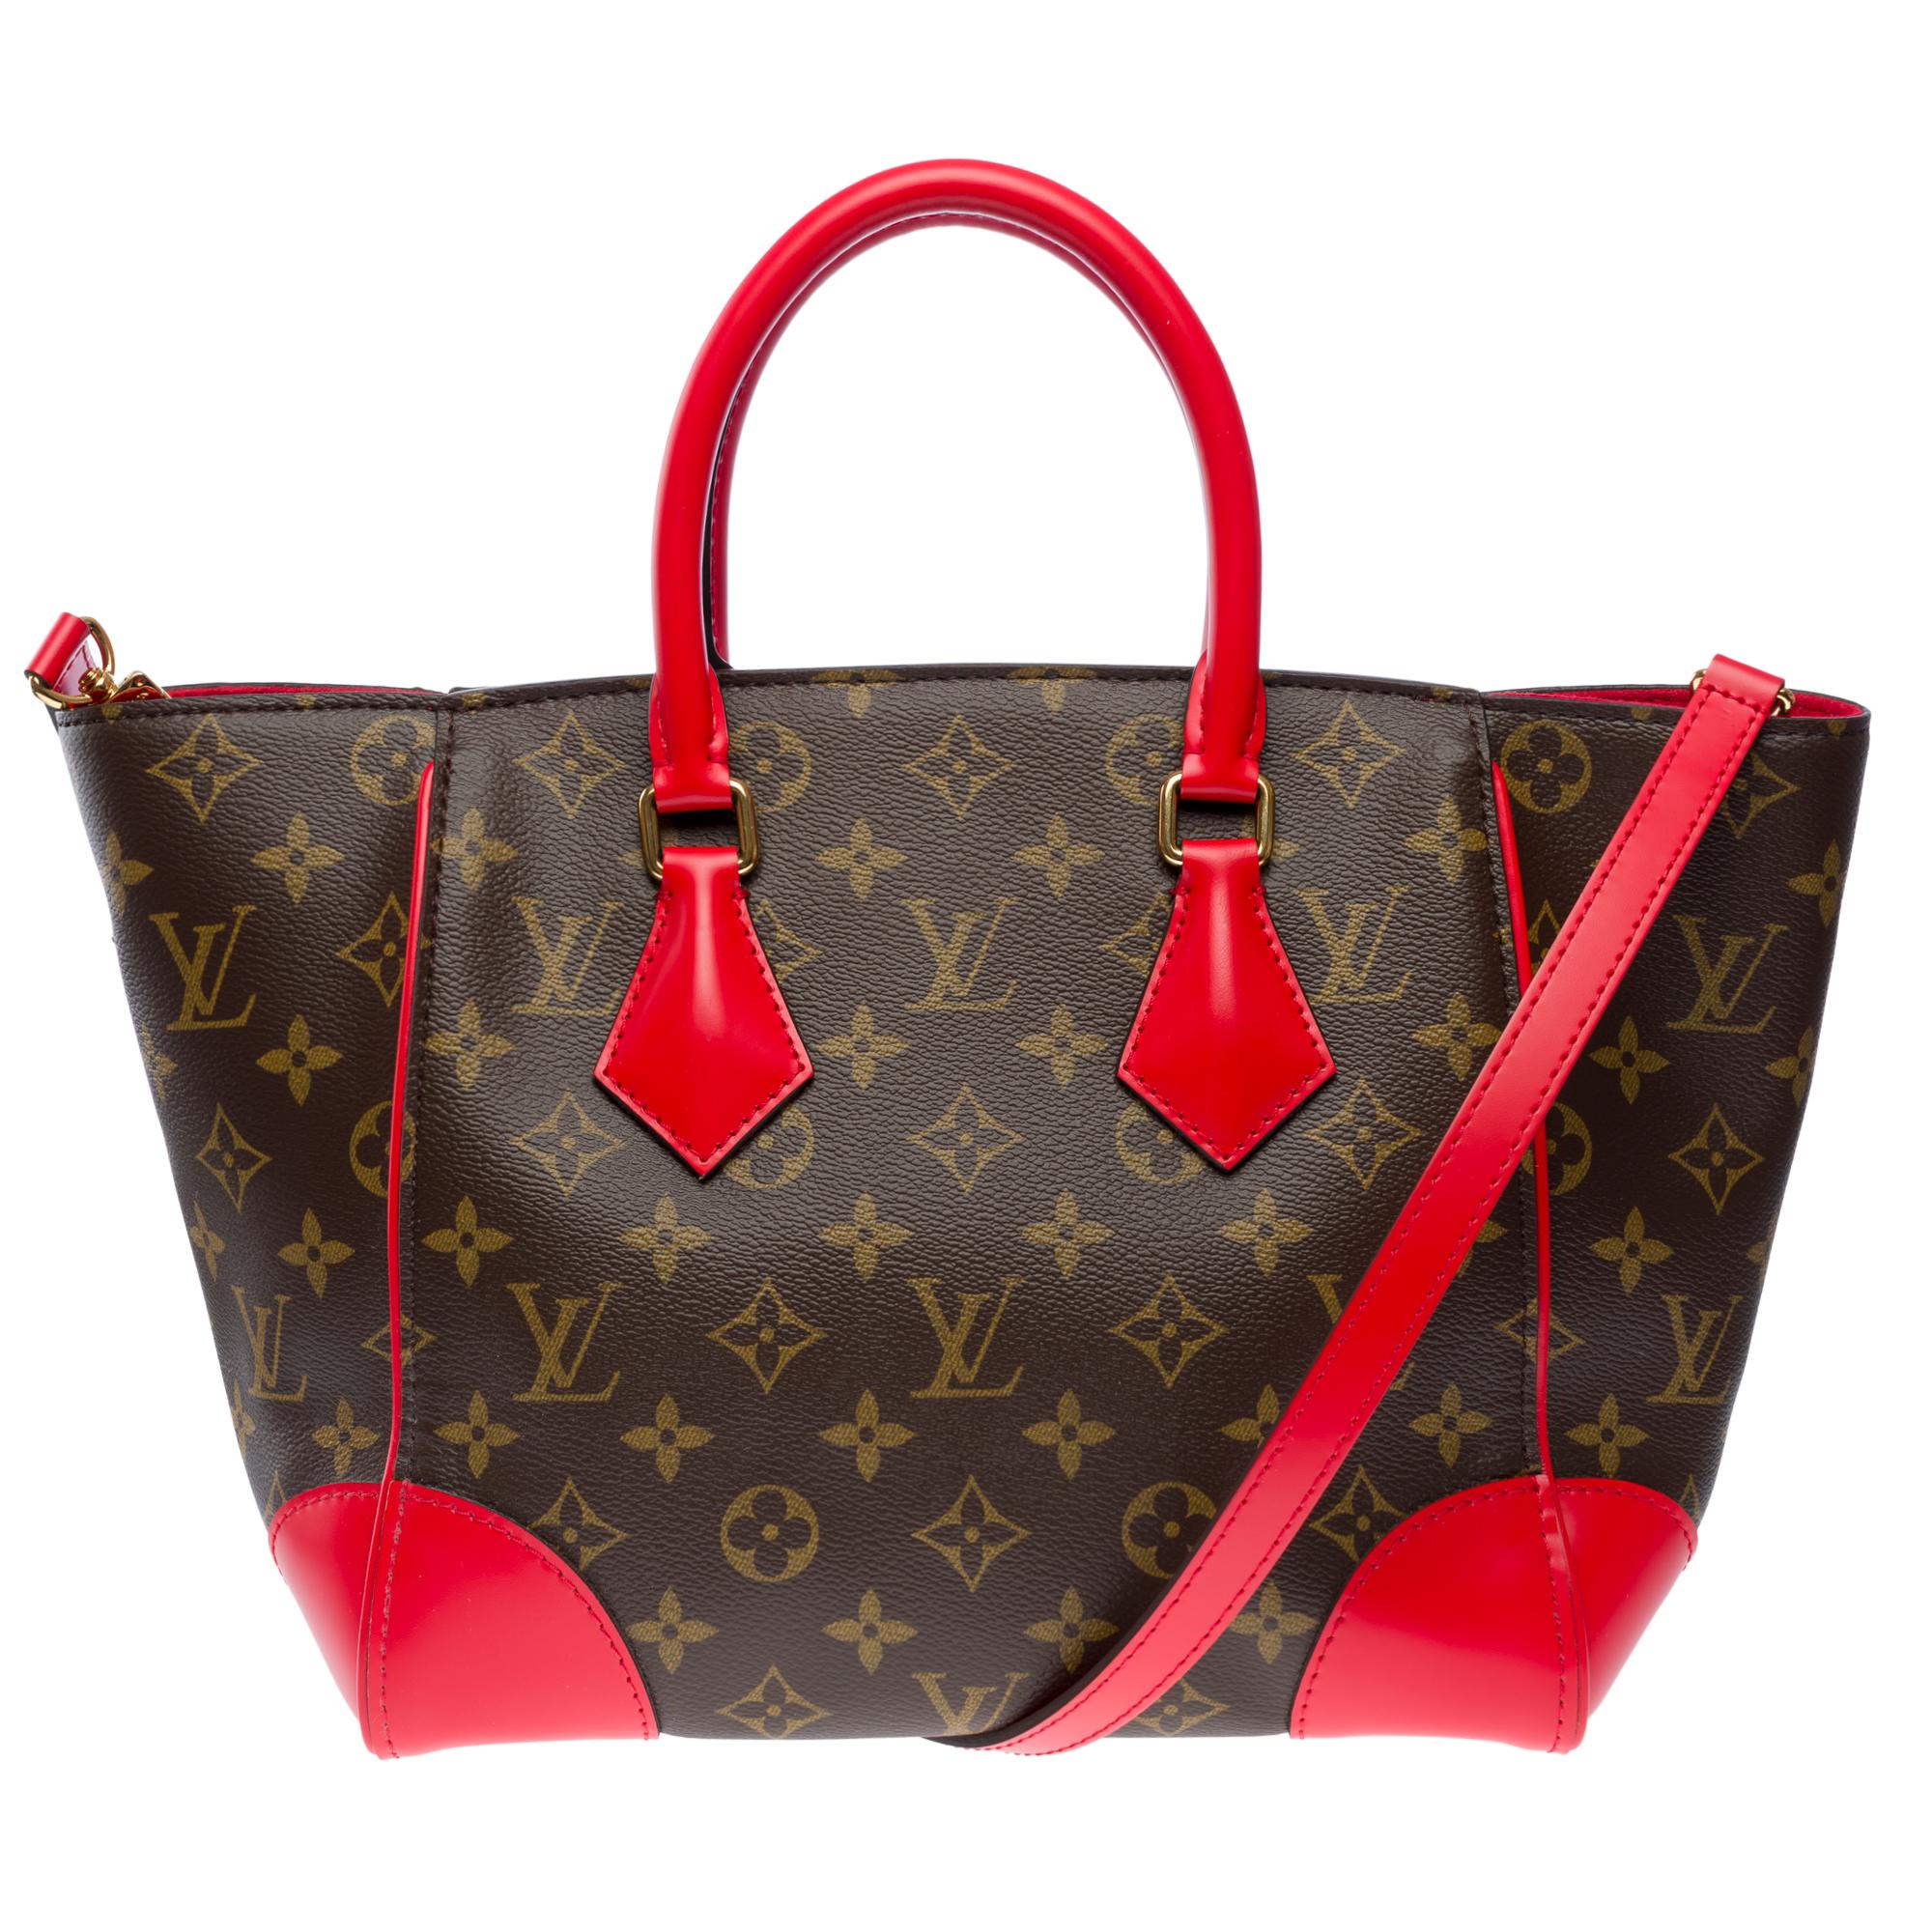 Louis​ ​Vuitton​ ​Phenix​ ​handbag​ ​strap​ ​in​ ​brown​ ​and​ ​red​ ​Monogram​ ​canvas.​ ​This​ ​model​ ​features​ ​two​ ​red​ ​cow​ ​leather​ ​handles,​ ​a​ ​gold​ ​metal​ ​trim.​ ​It​ ​can​ ​be​ ​worn​ ​by​ ​hand,​​ ​shoulder​ ​or